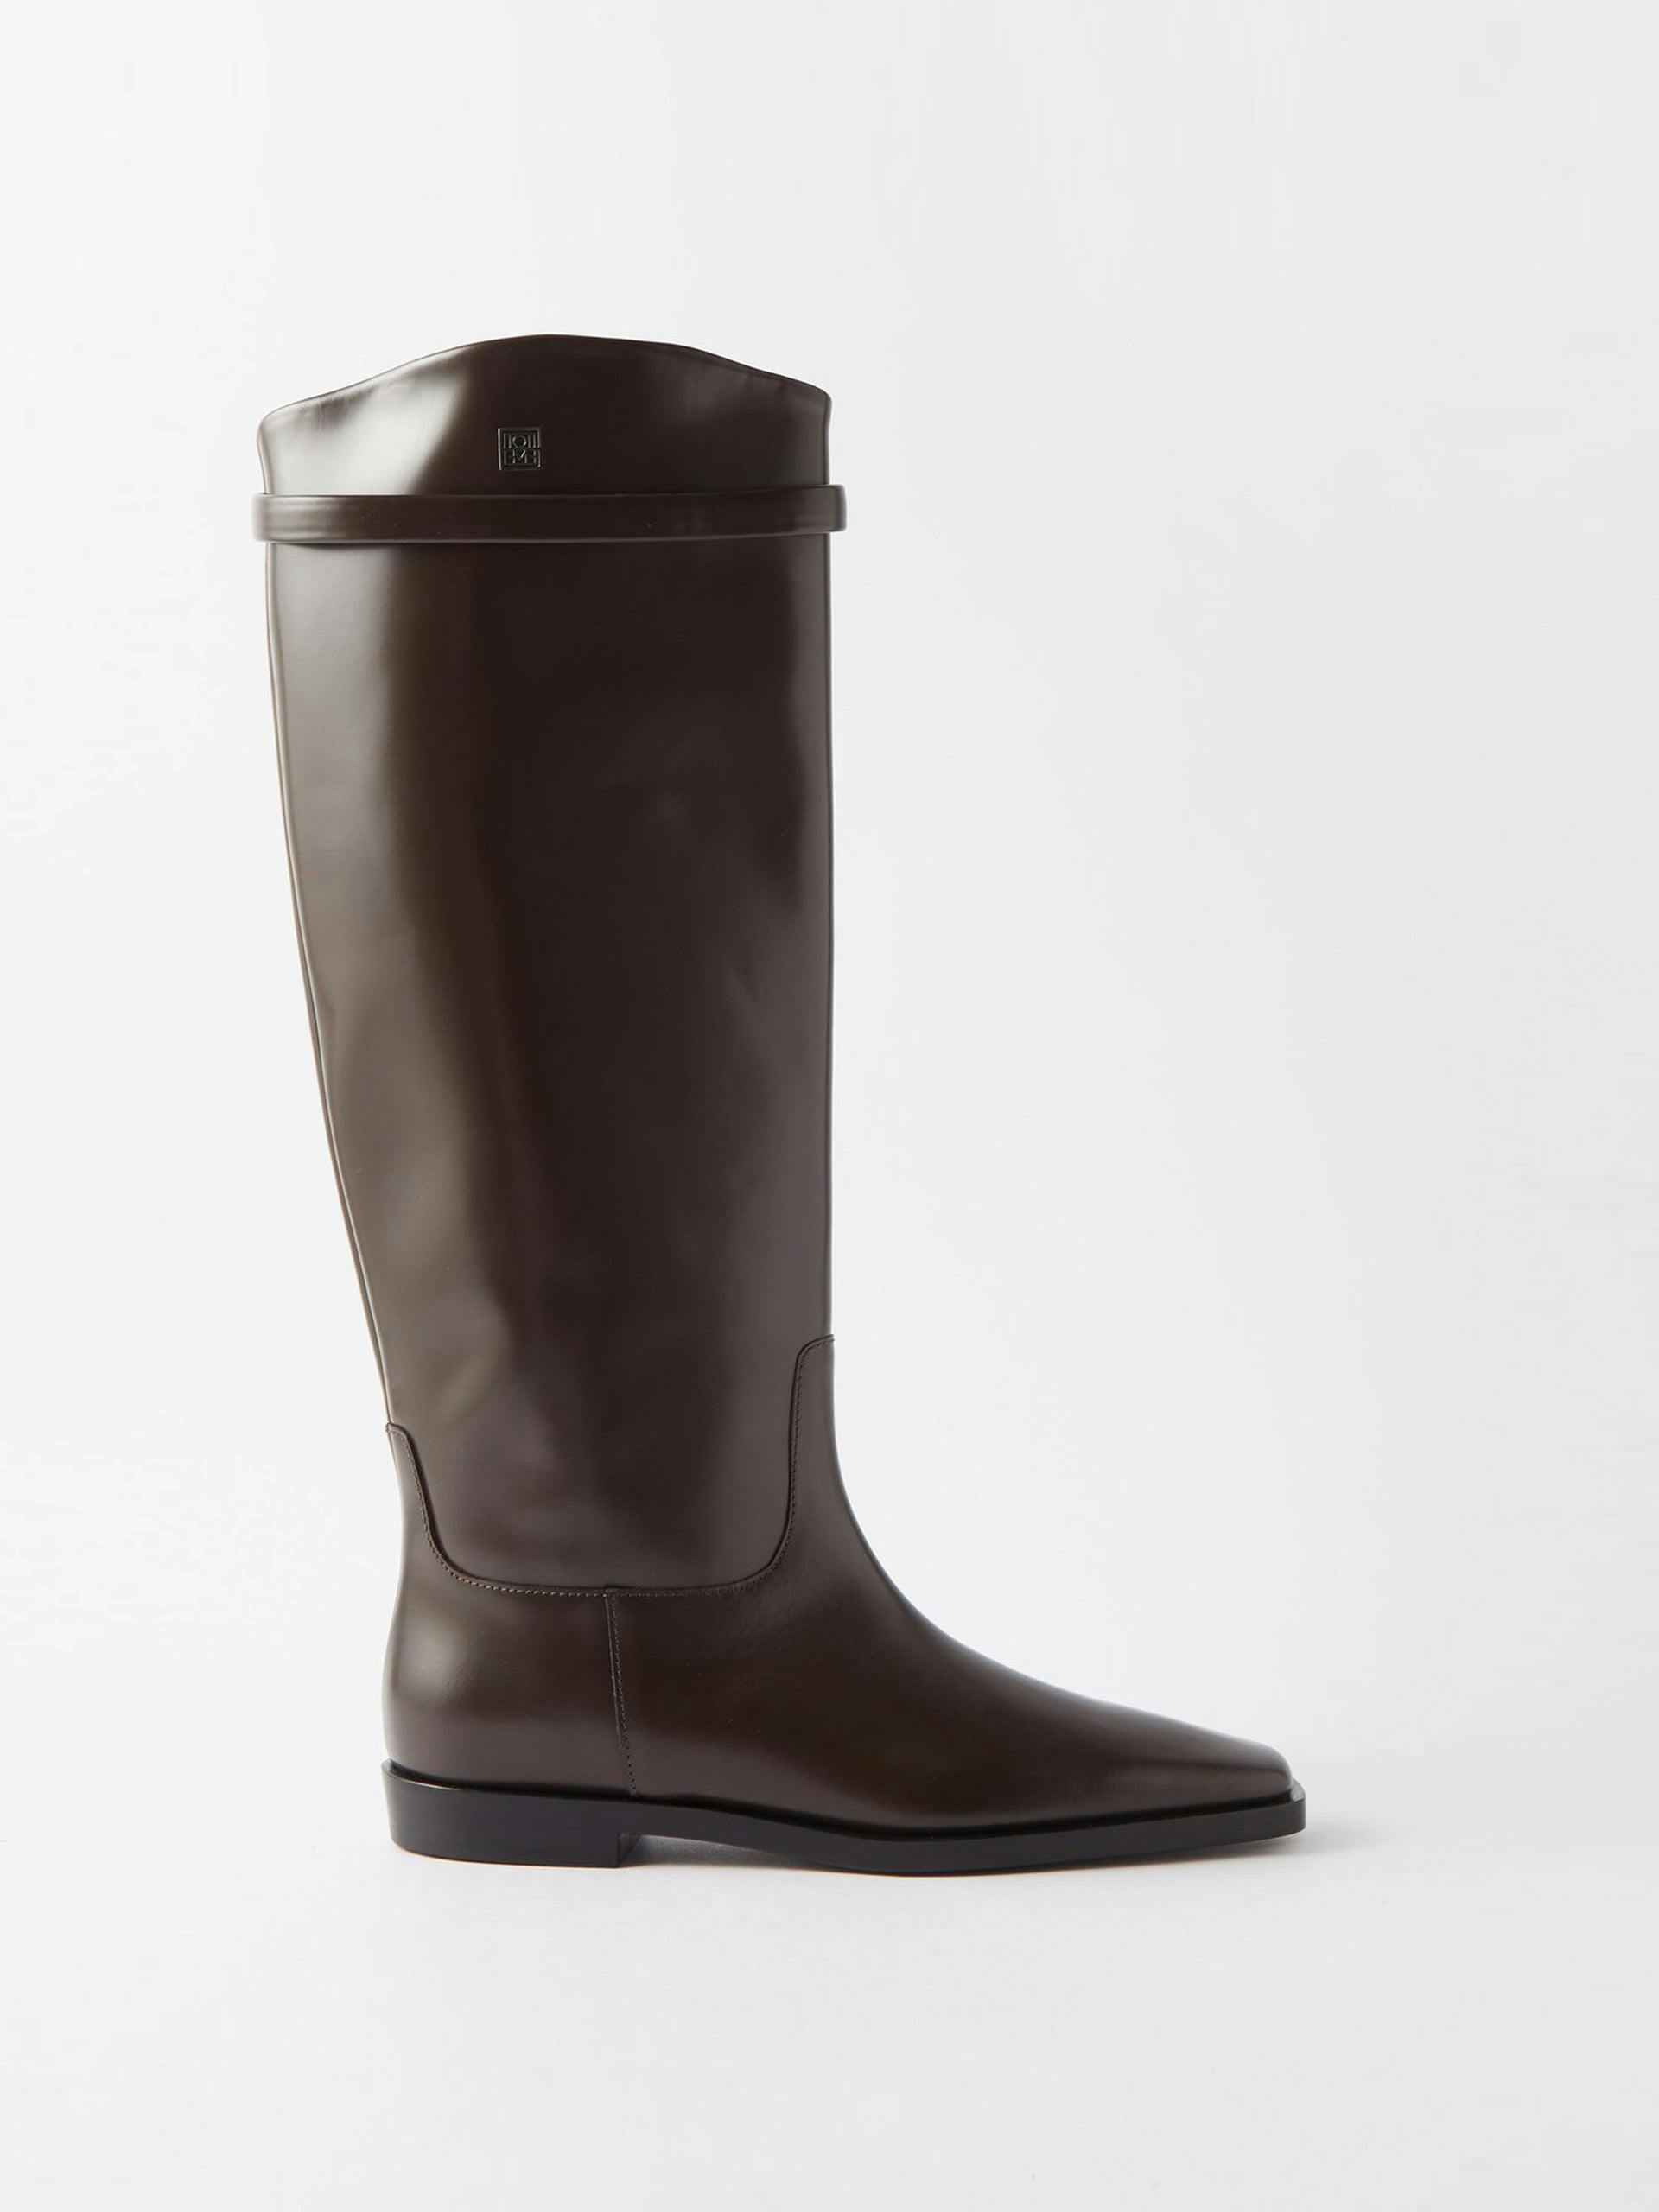 Square-toe leather knee-high boots